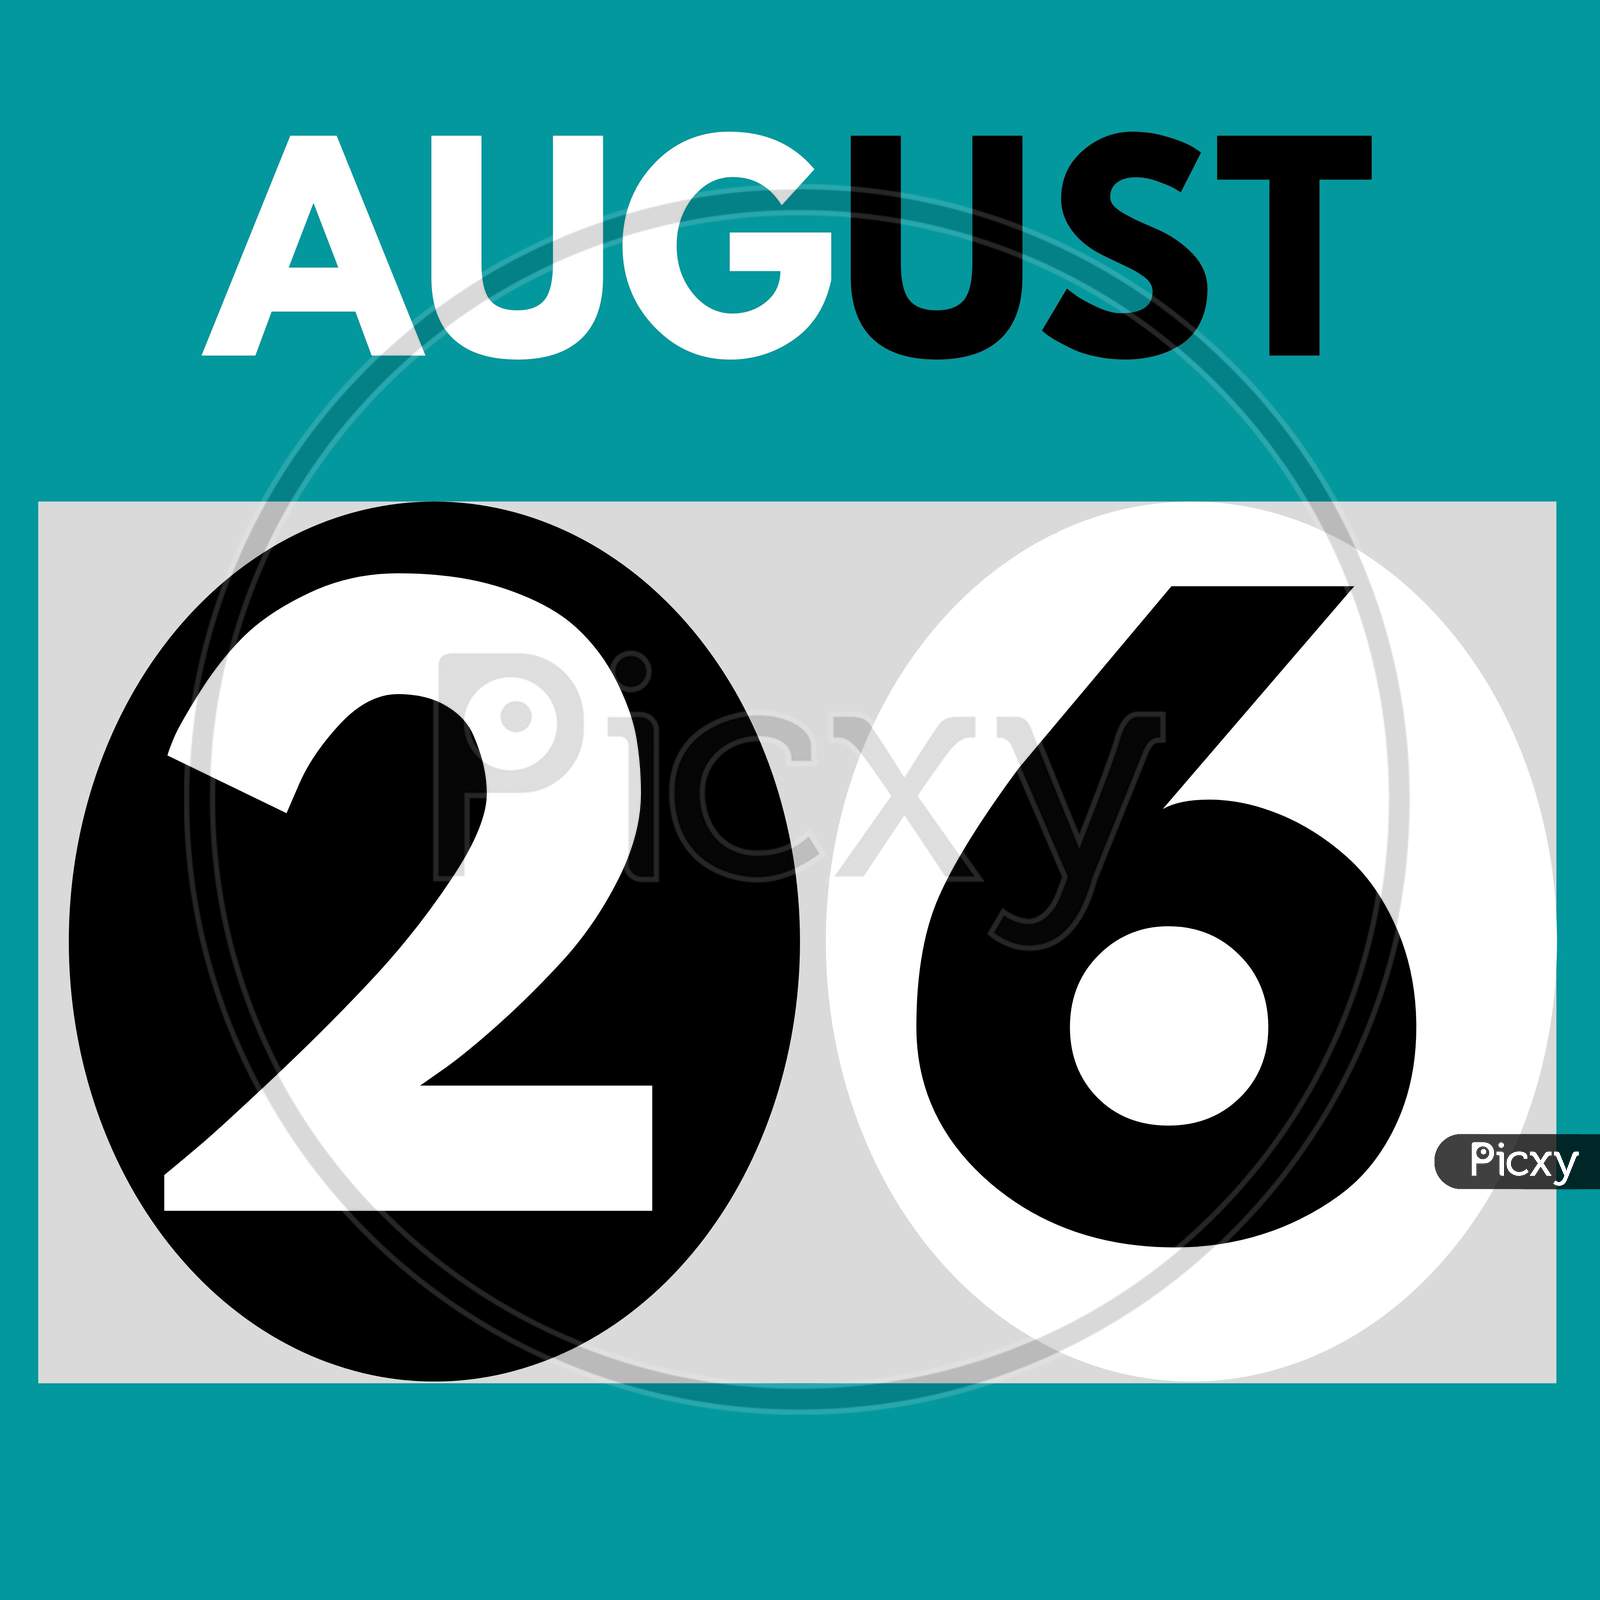 August 26 . Modern Daily Calendar Icon .Date ,Day, Month .Calendar For The Month Of August